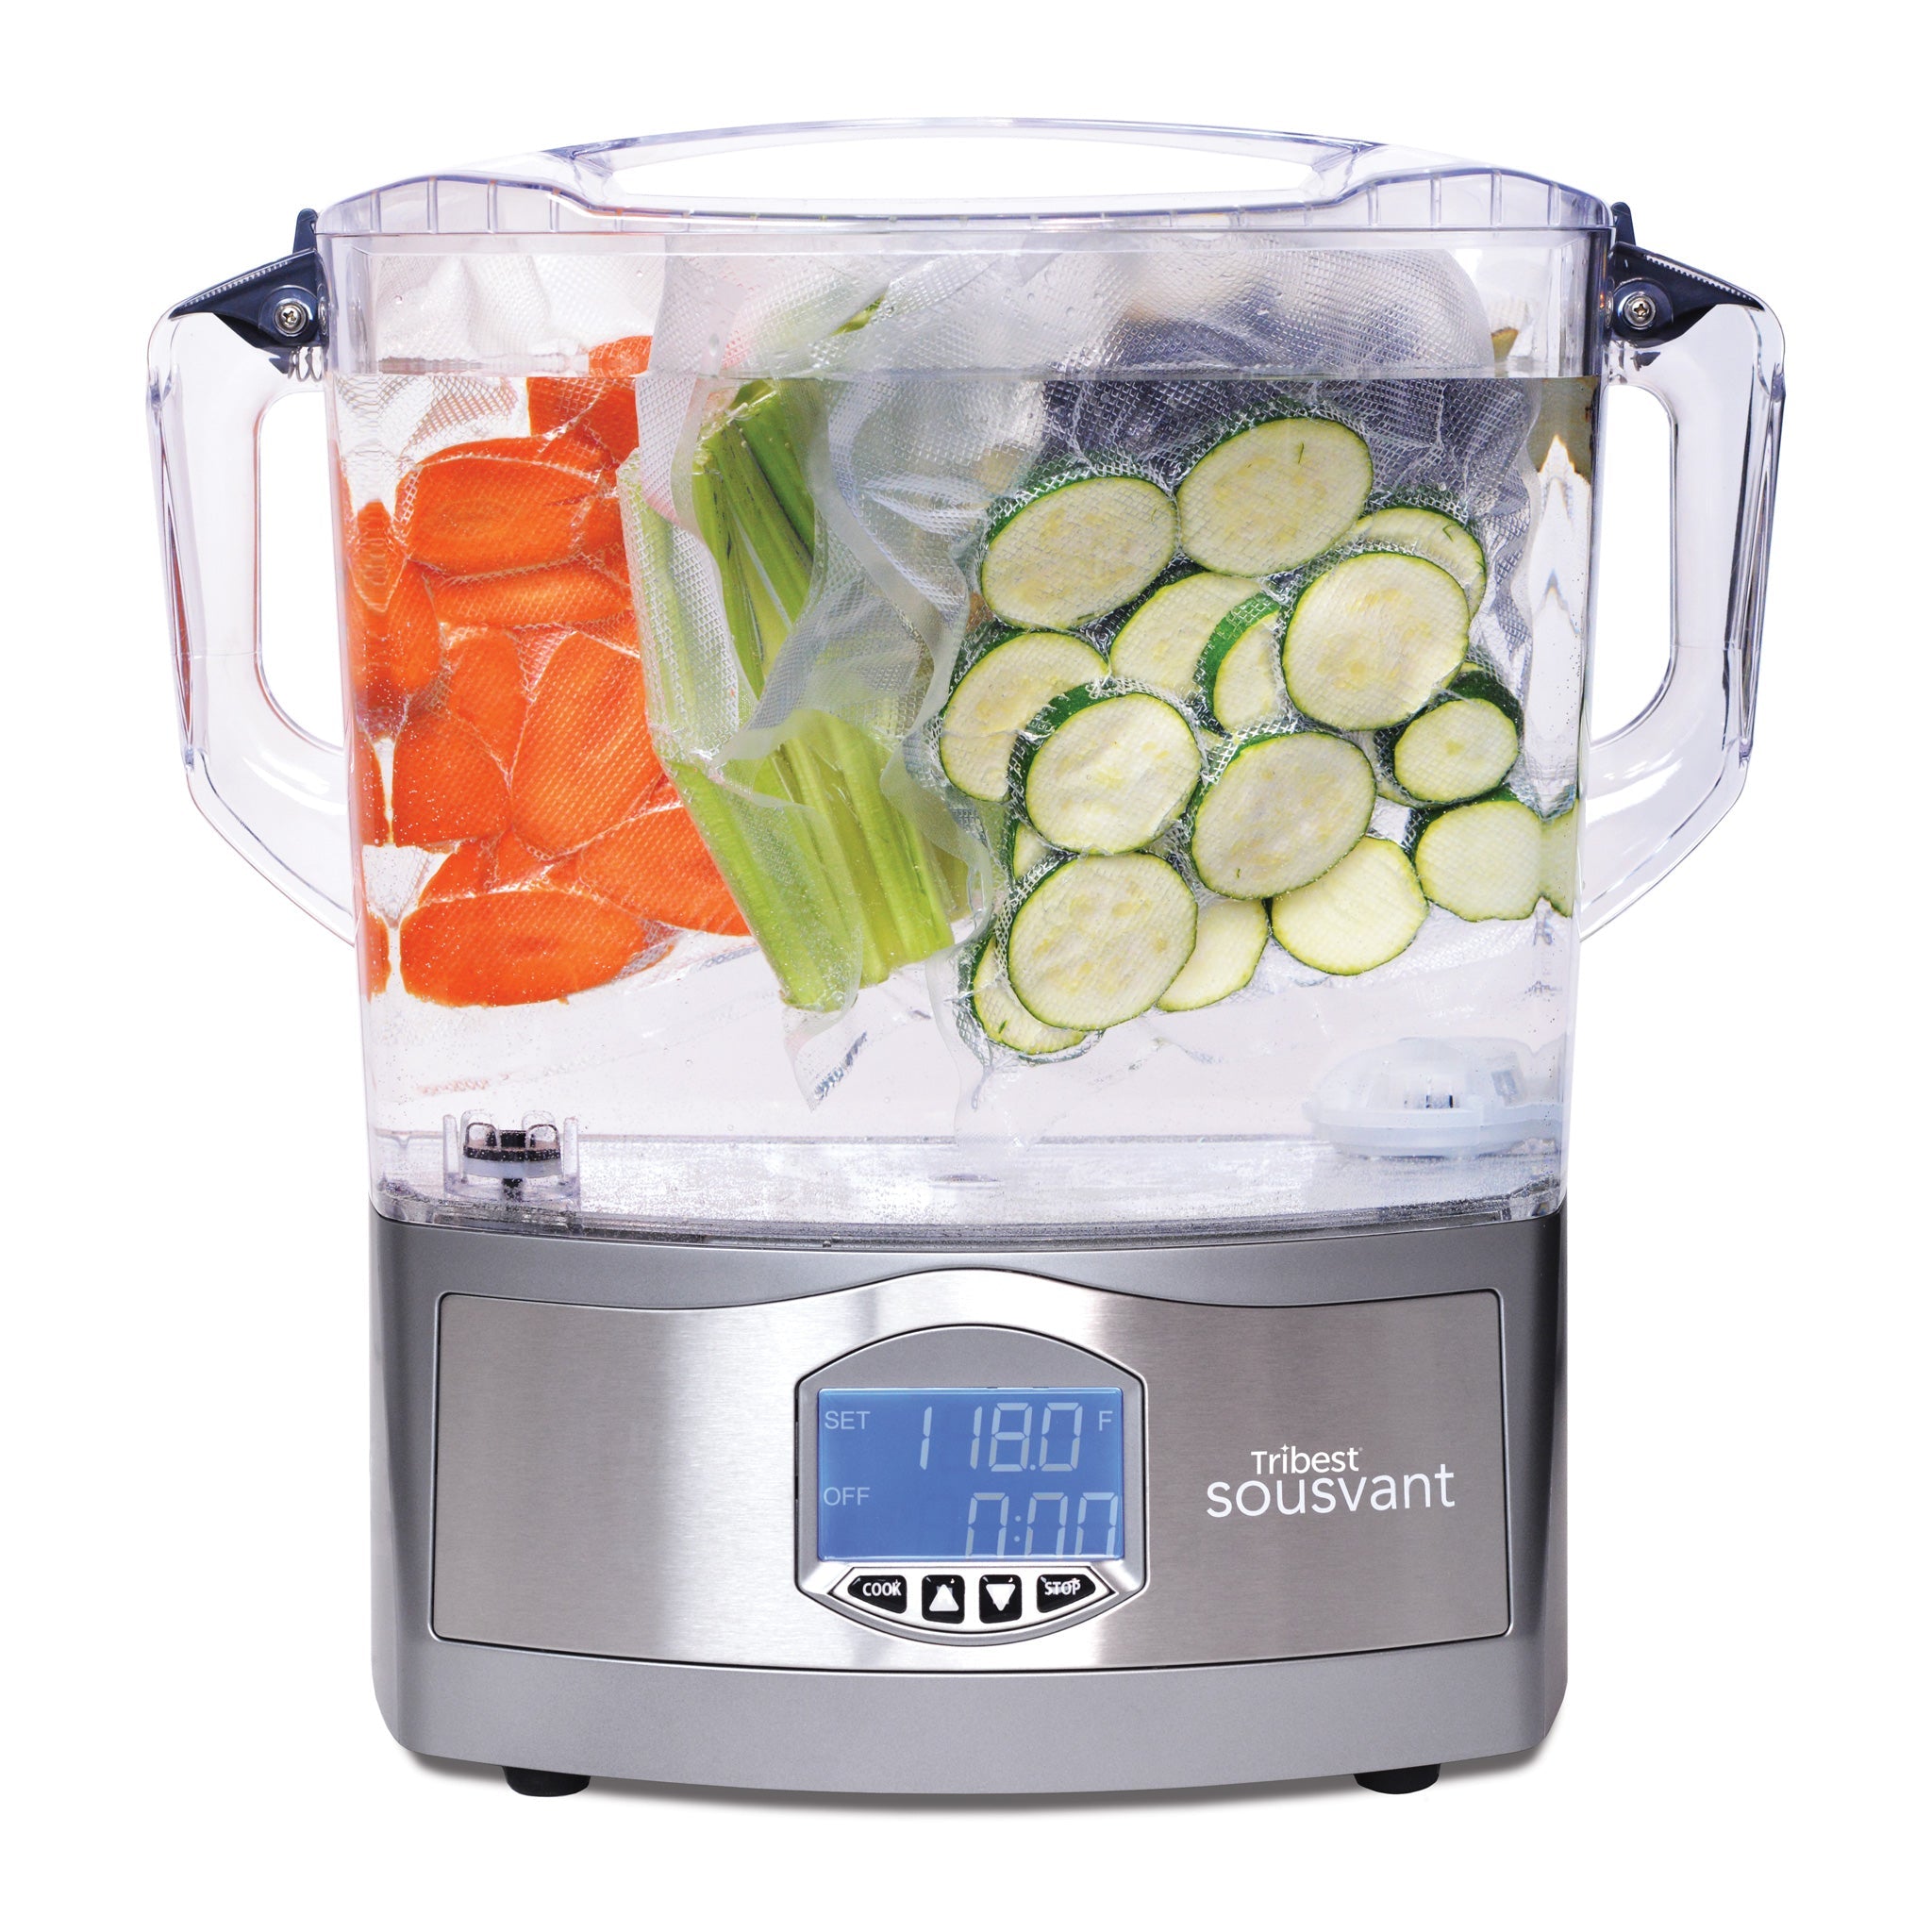 Sousvant Sous Vide Circulator SV-101 with Carrots, Celery, and Cucumbers - Tribest